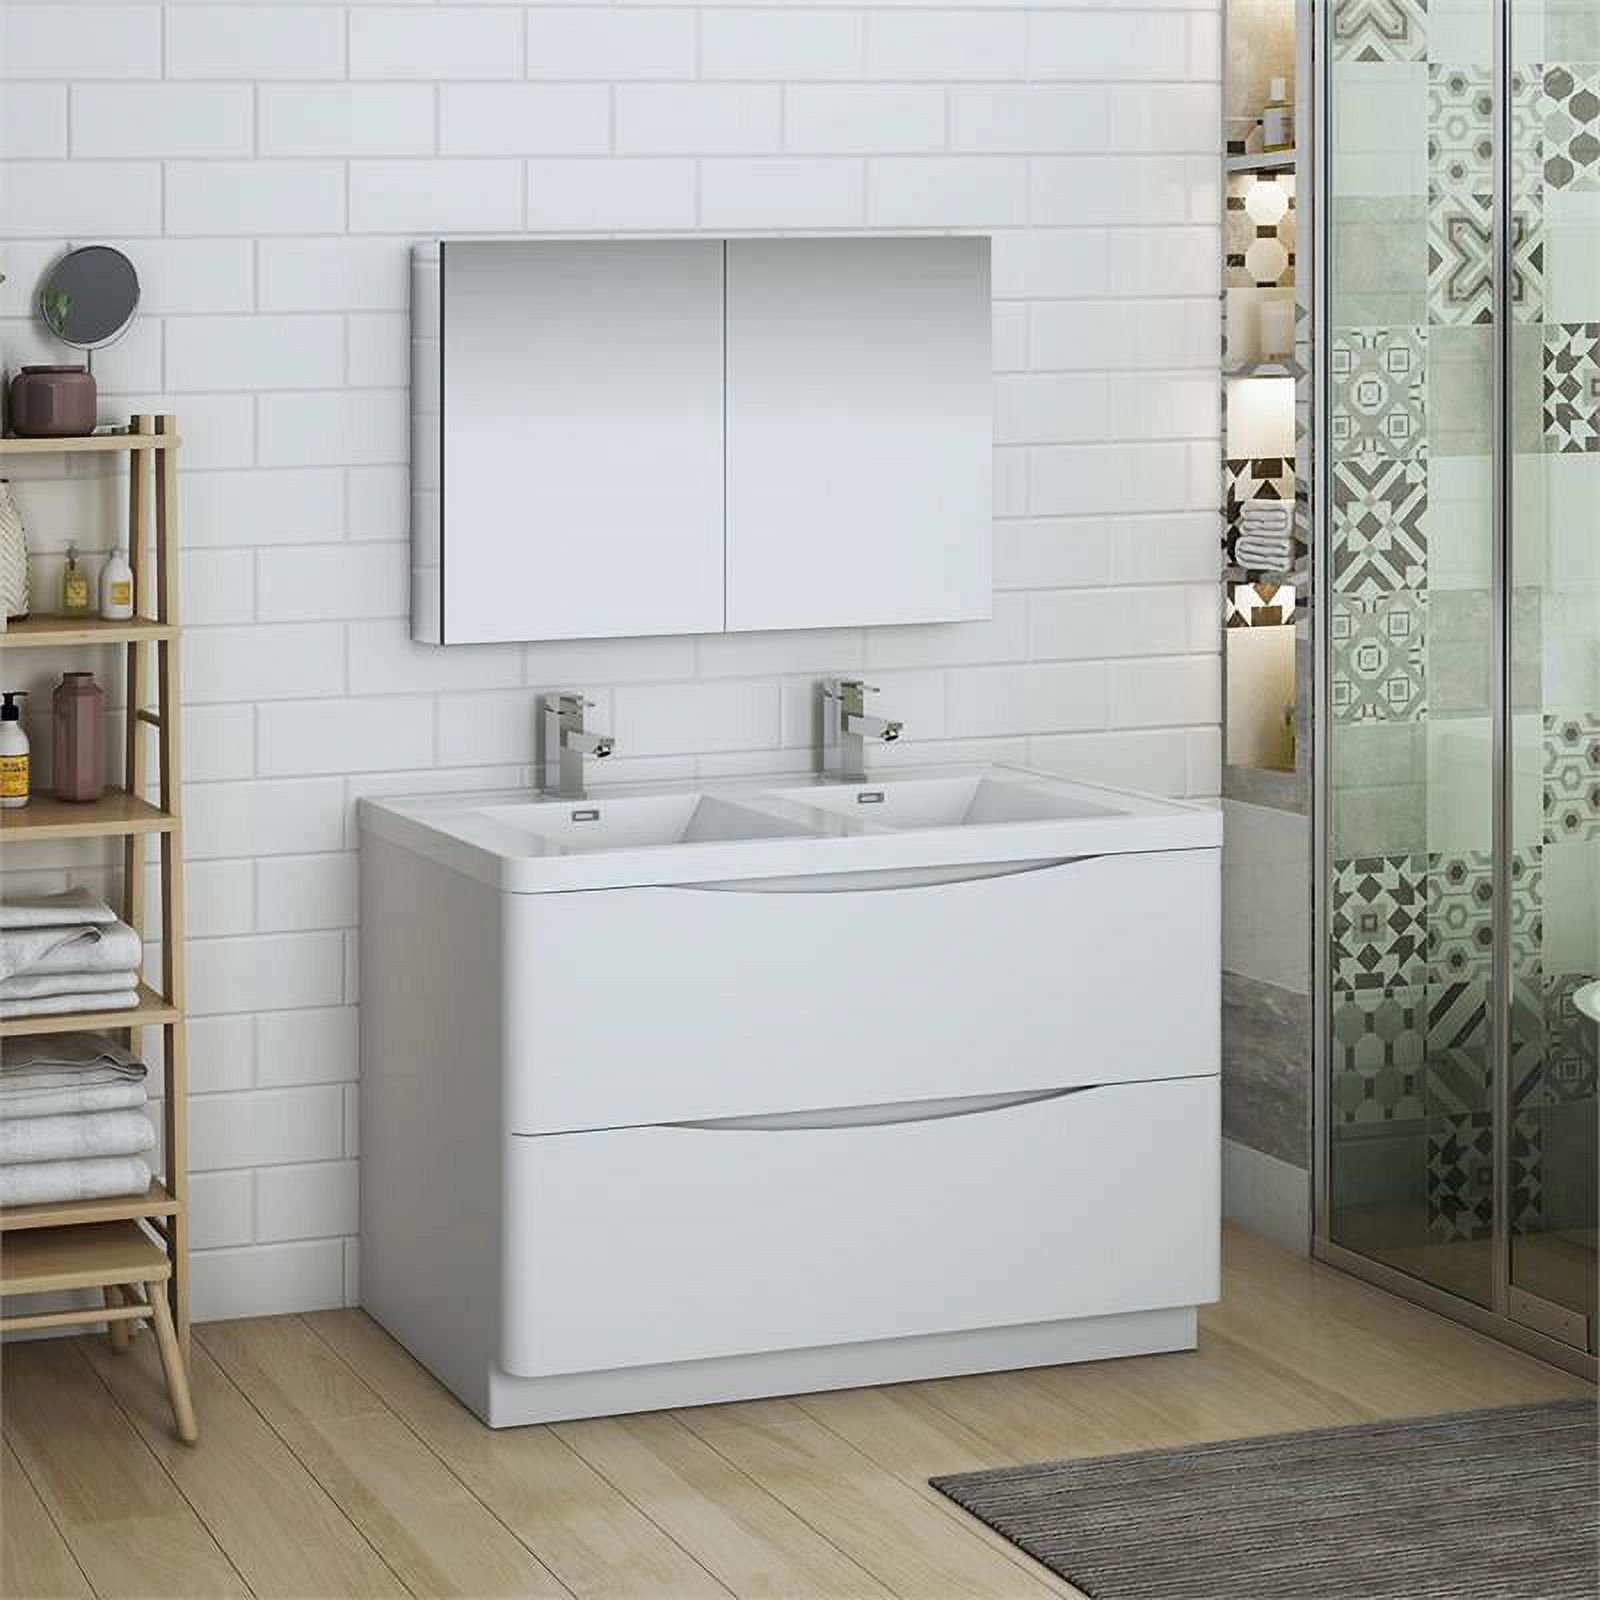 Fresca Tuscany 48" Wood Bathroom Vanity with Double Sinks in Glossy White - image 2 of 8